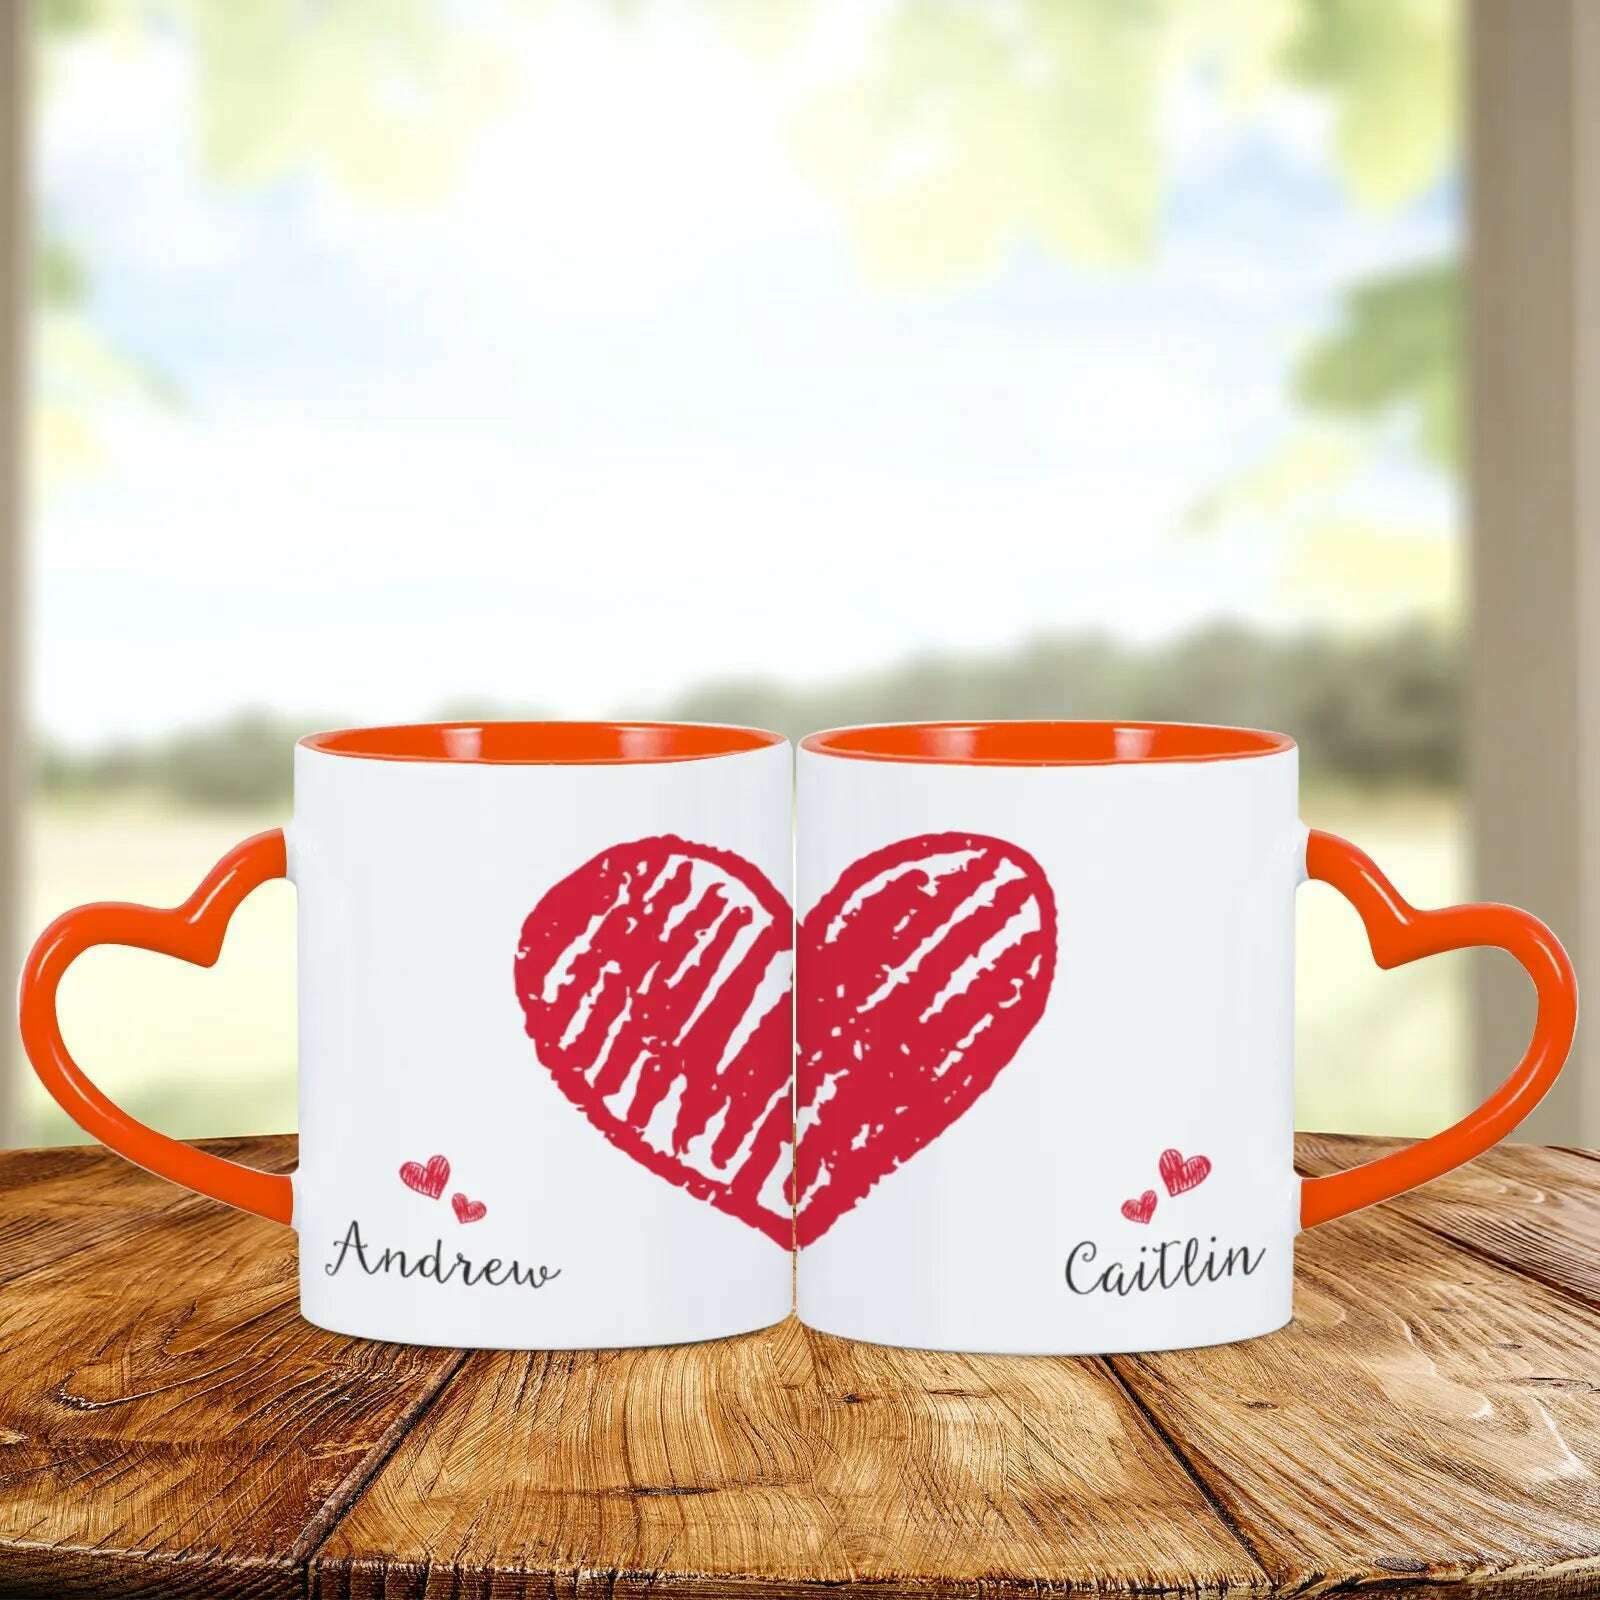 2pc Heart Handle Personalized Name Couple Coffee Mug for Girlfriend Wife Husband Valentine's Day present for Couples Coffee Mugs, Orange / 325ml, KIMLUD Women's Clothes